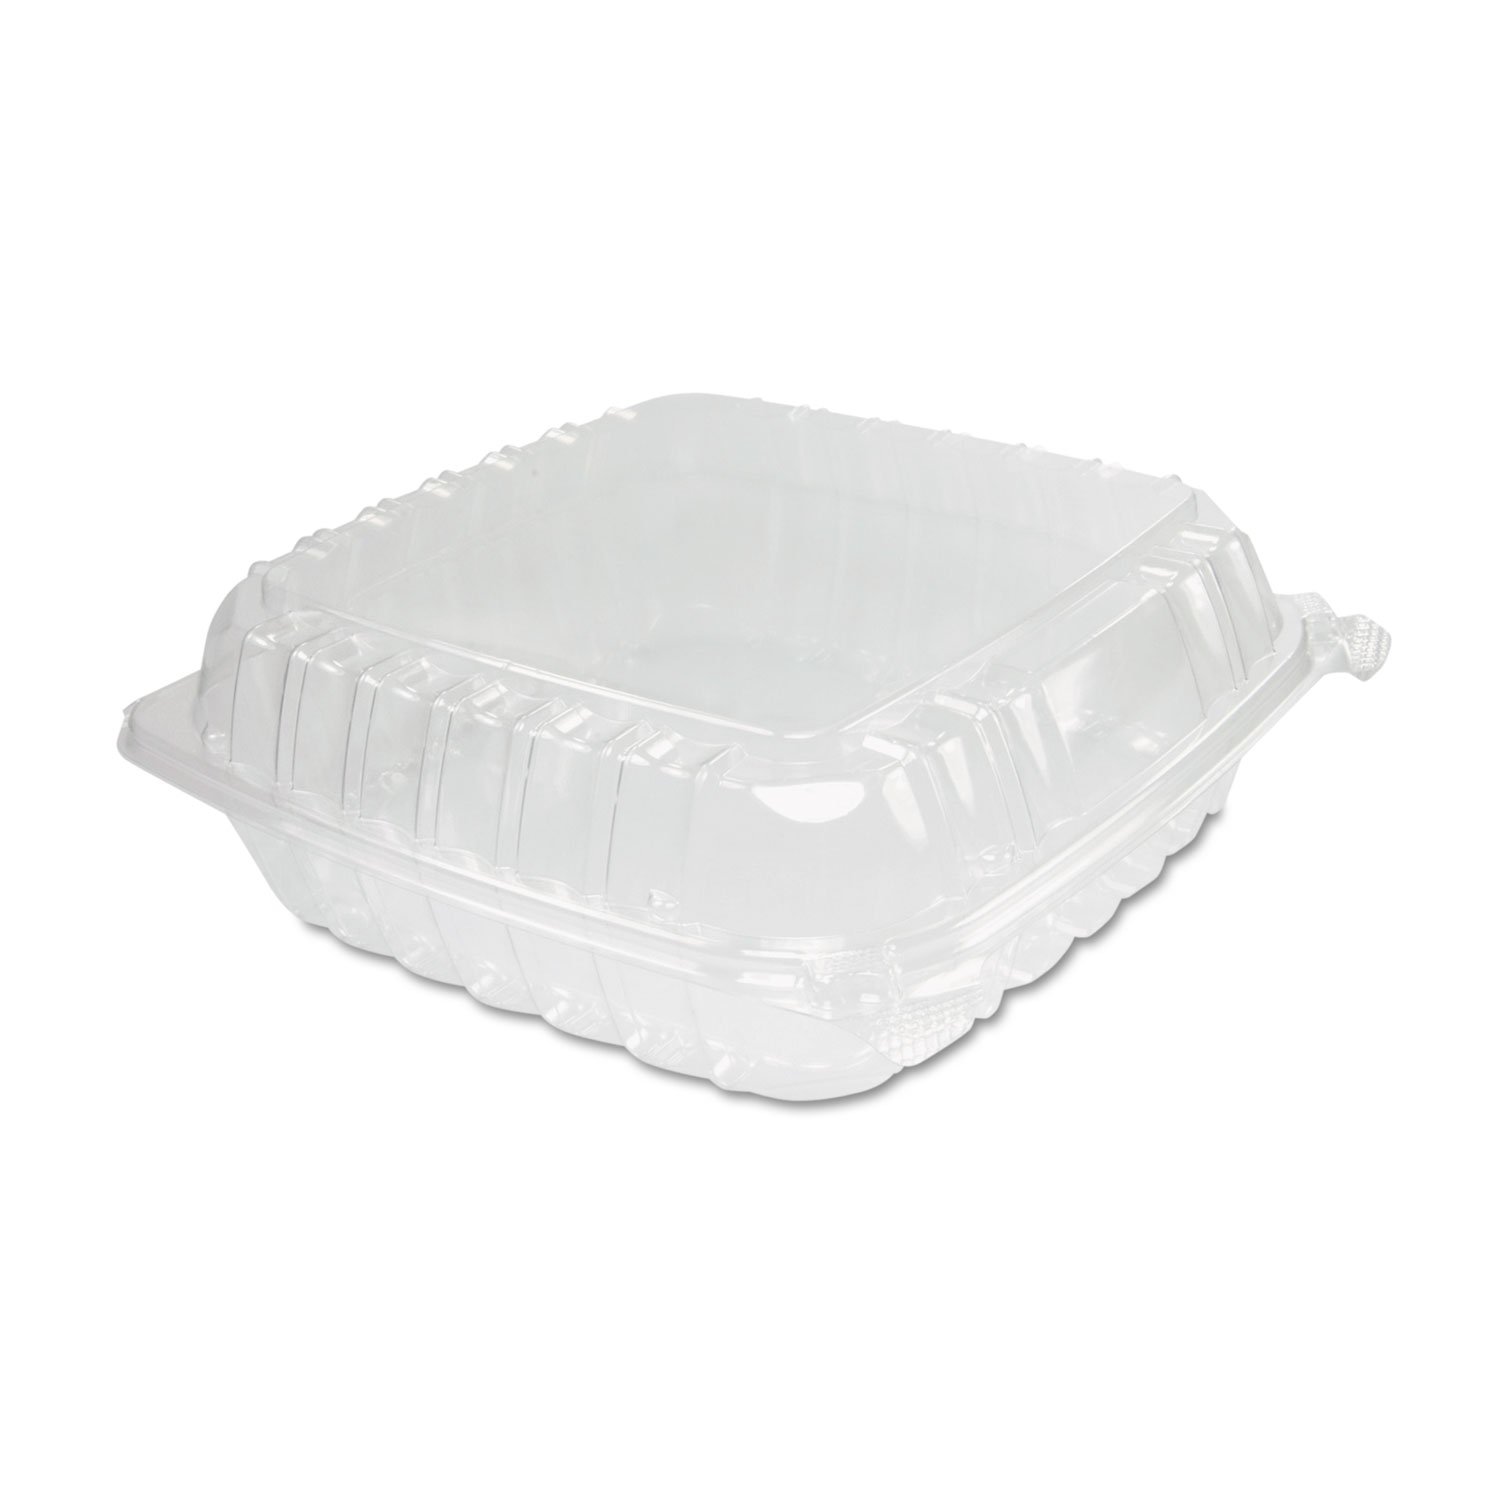 ClearSeal Plastic Hinged Container, Large, 9x9-1/2x3, Clear, 100/Bag